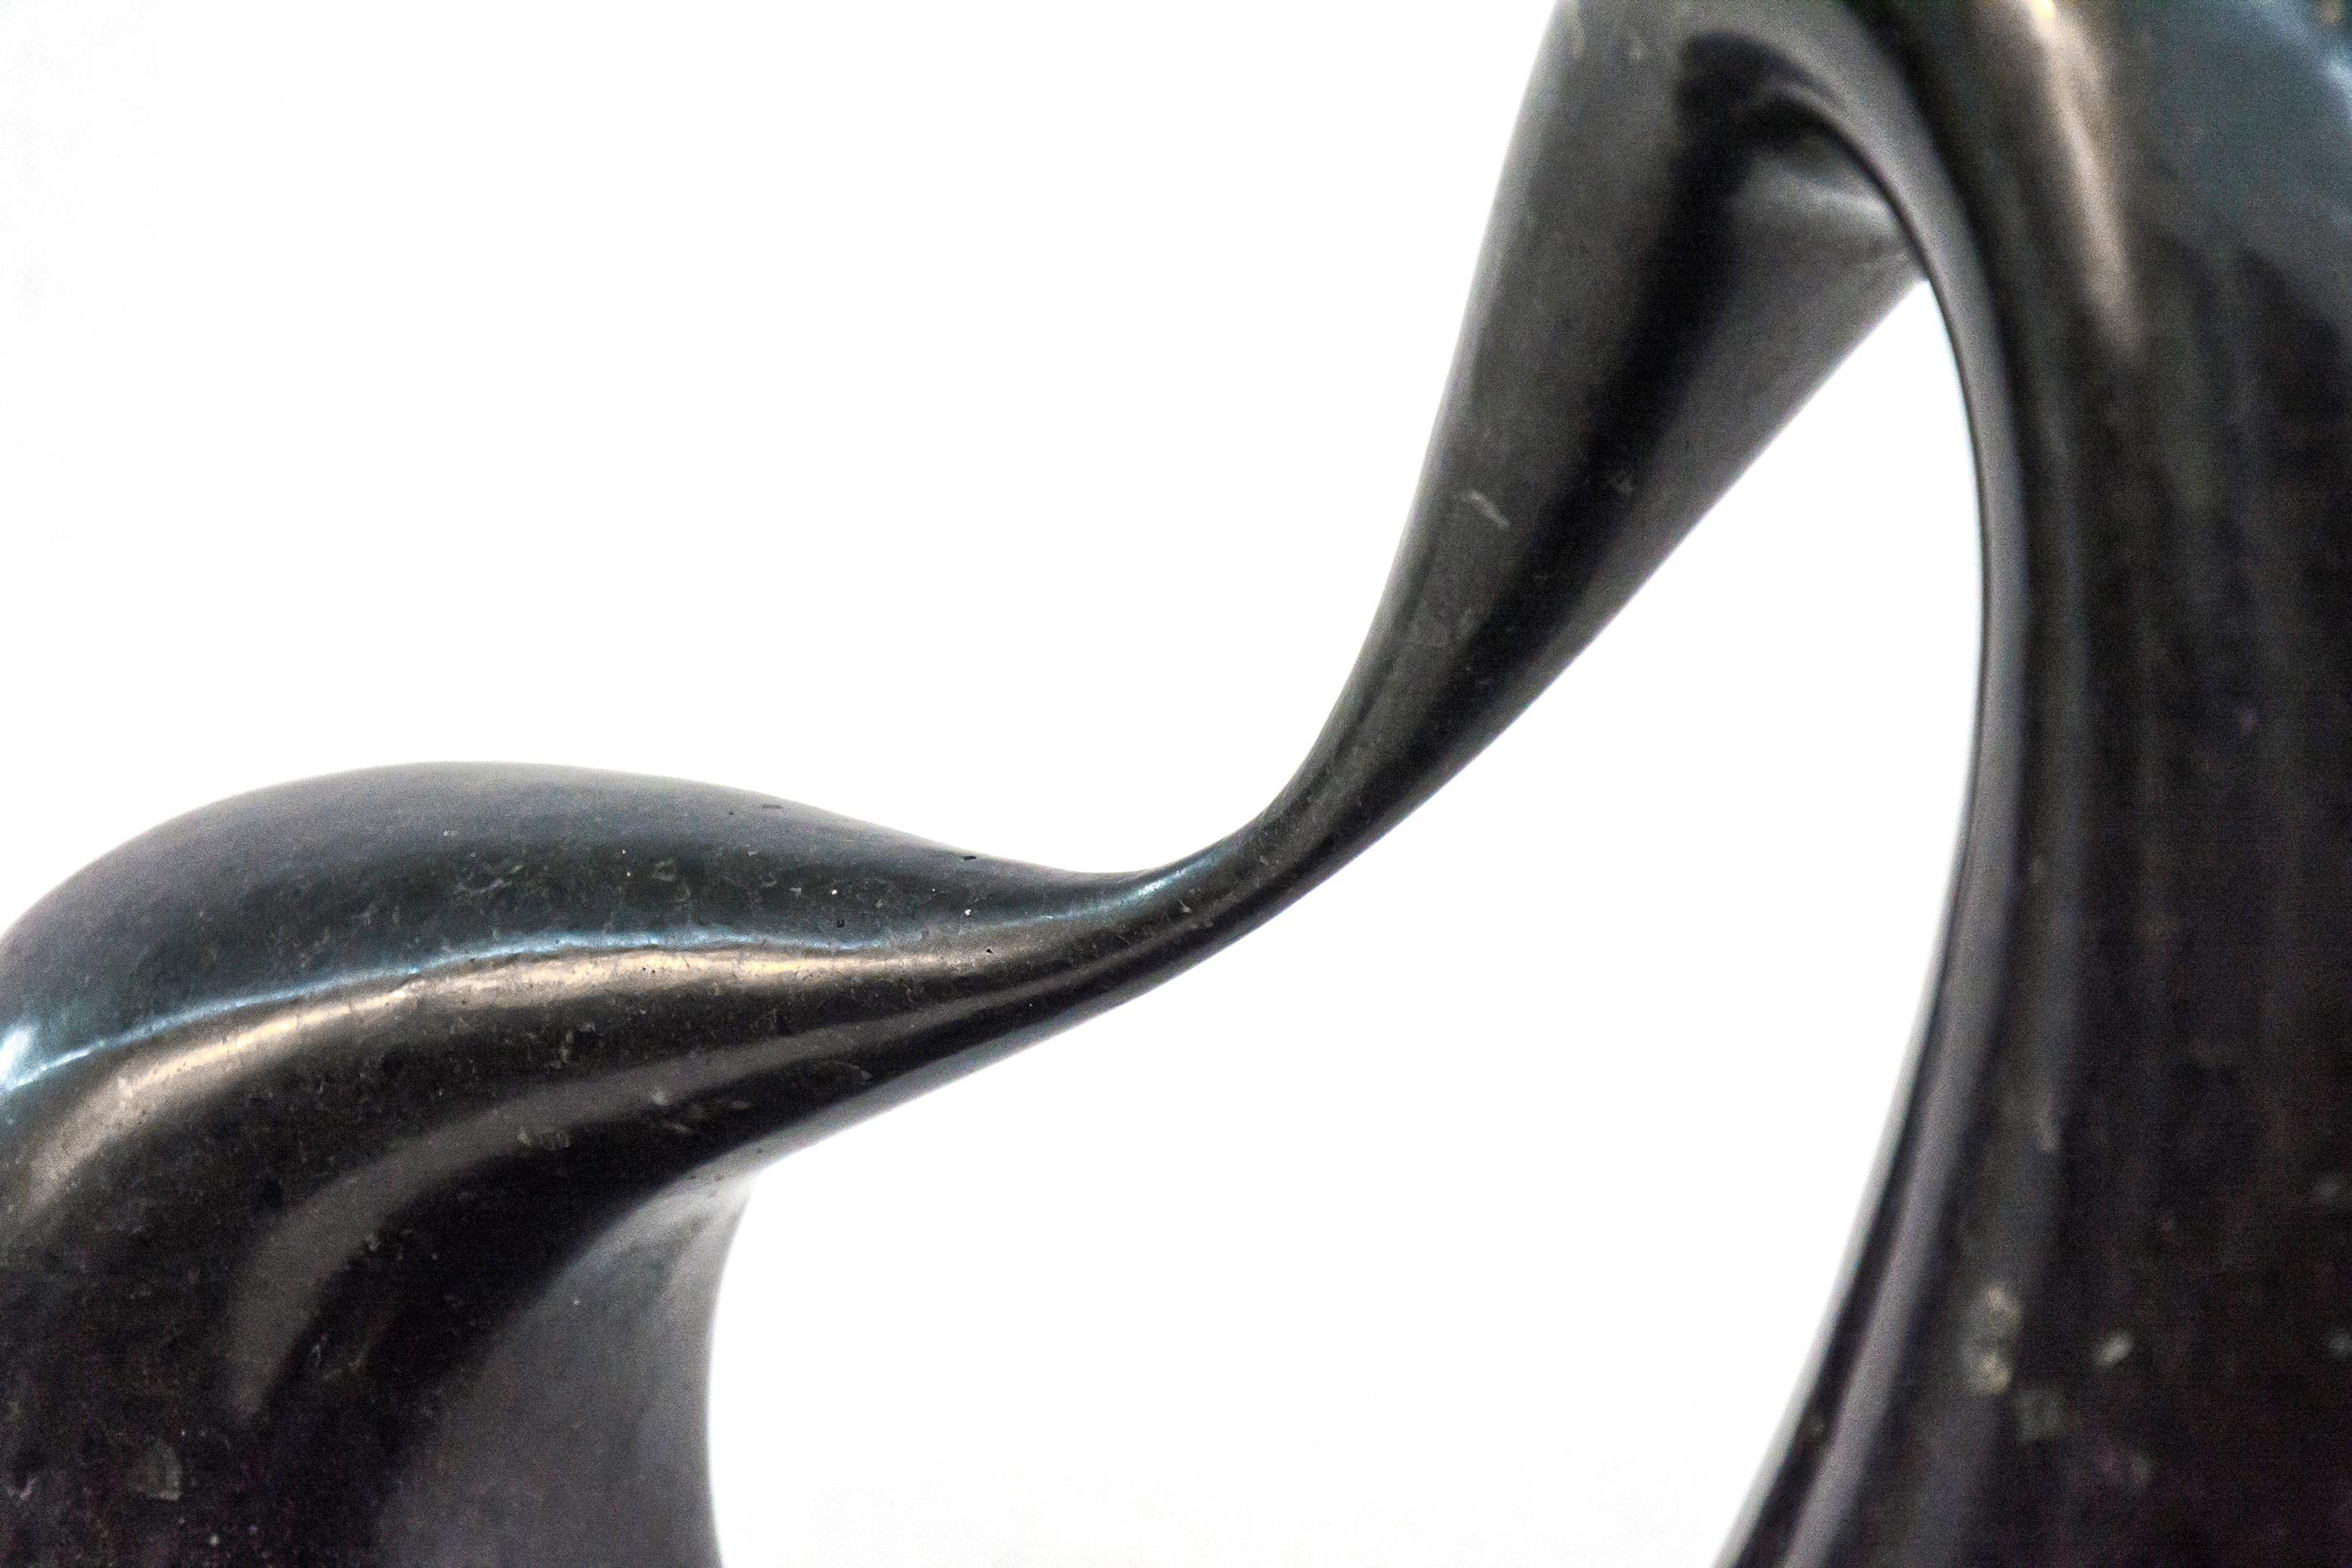 Smooth, black marble flecked with copper and white is engineered into a thick loop that is stretched thin on one side in this tabletop sculpture. Poised on a flat metal base, the flattened loop features a thinned portion after which the work is